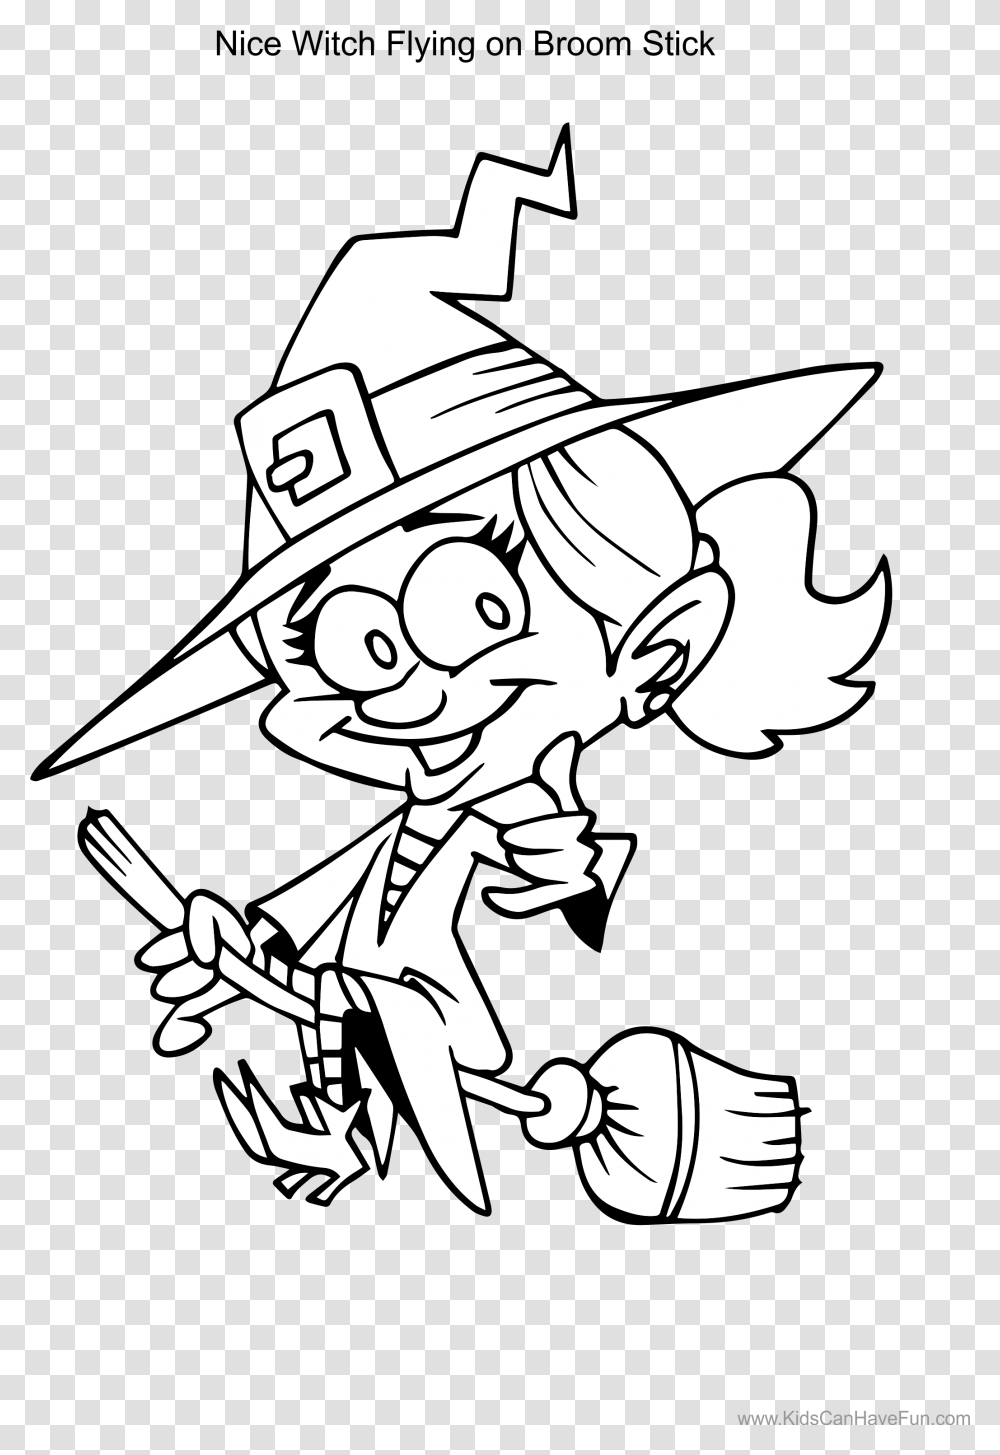 Witch On A Broom Clipart Witch On A Broom Coloring Page, Drawing, Stencil, Sketch Transparent Png